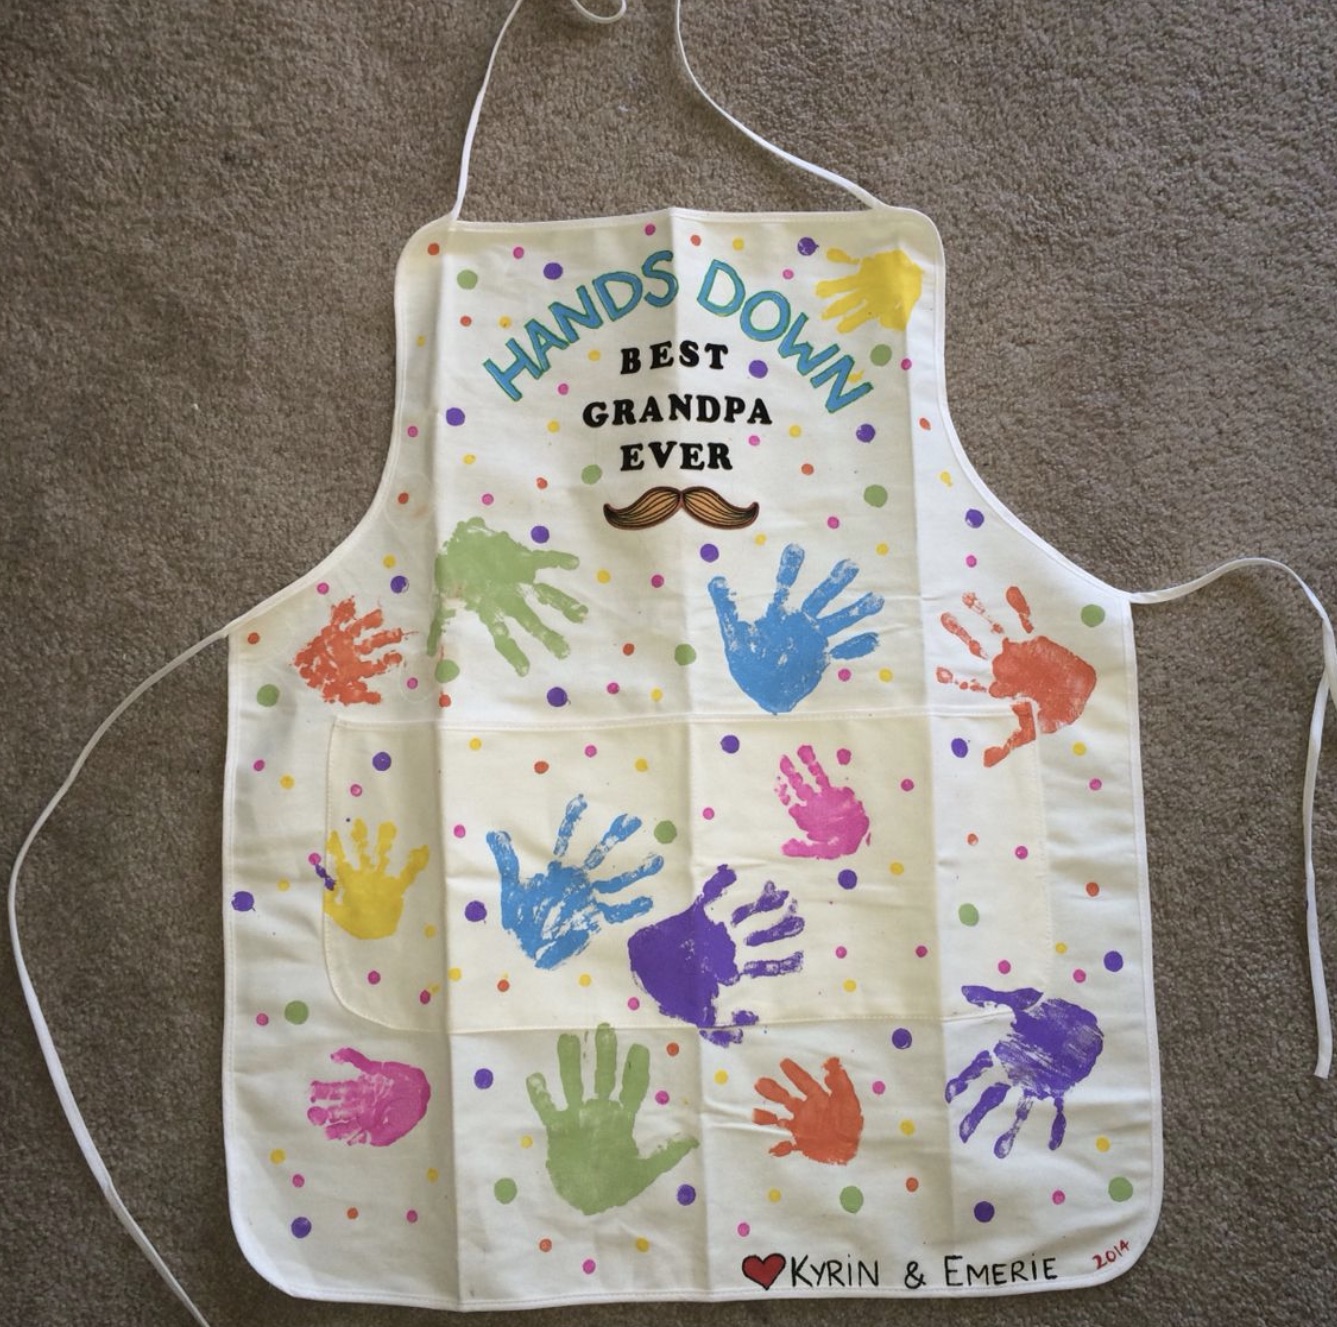 Special grandparent gift ideas: DIY handprint apron from the kids